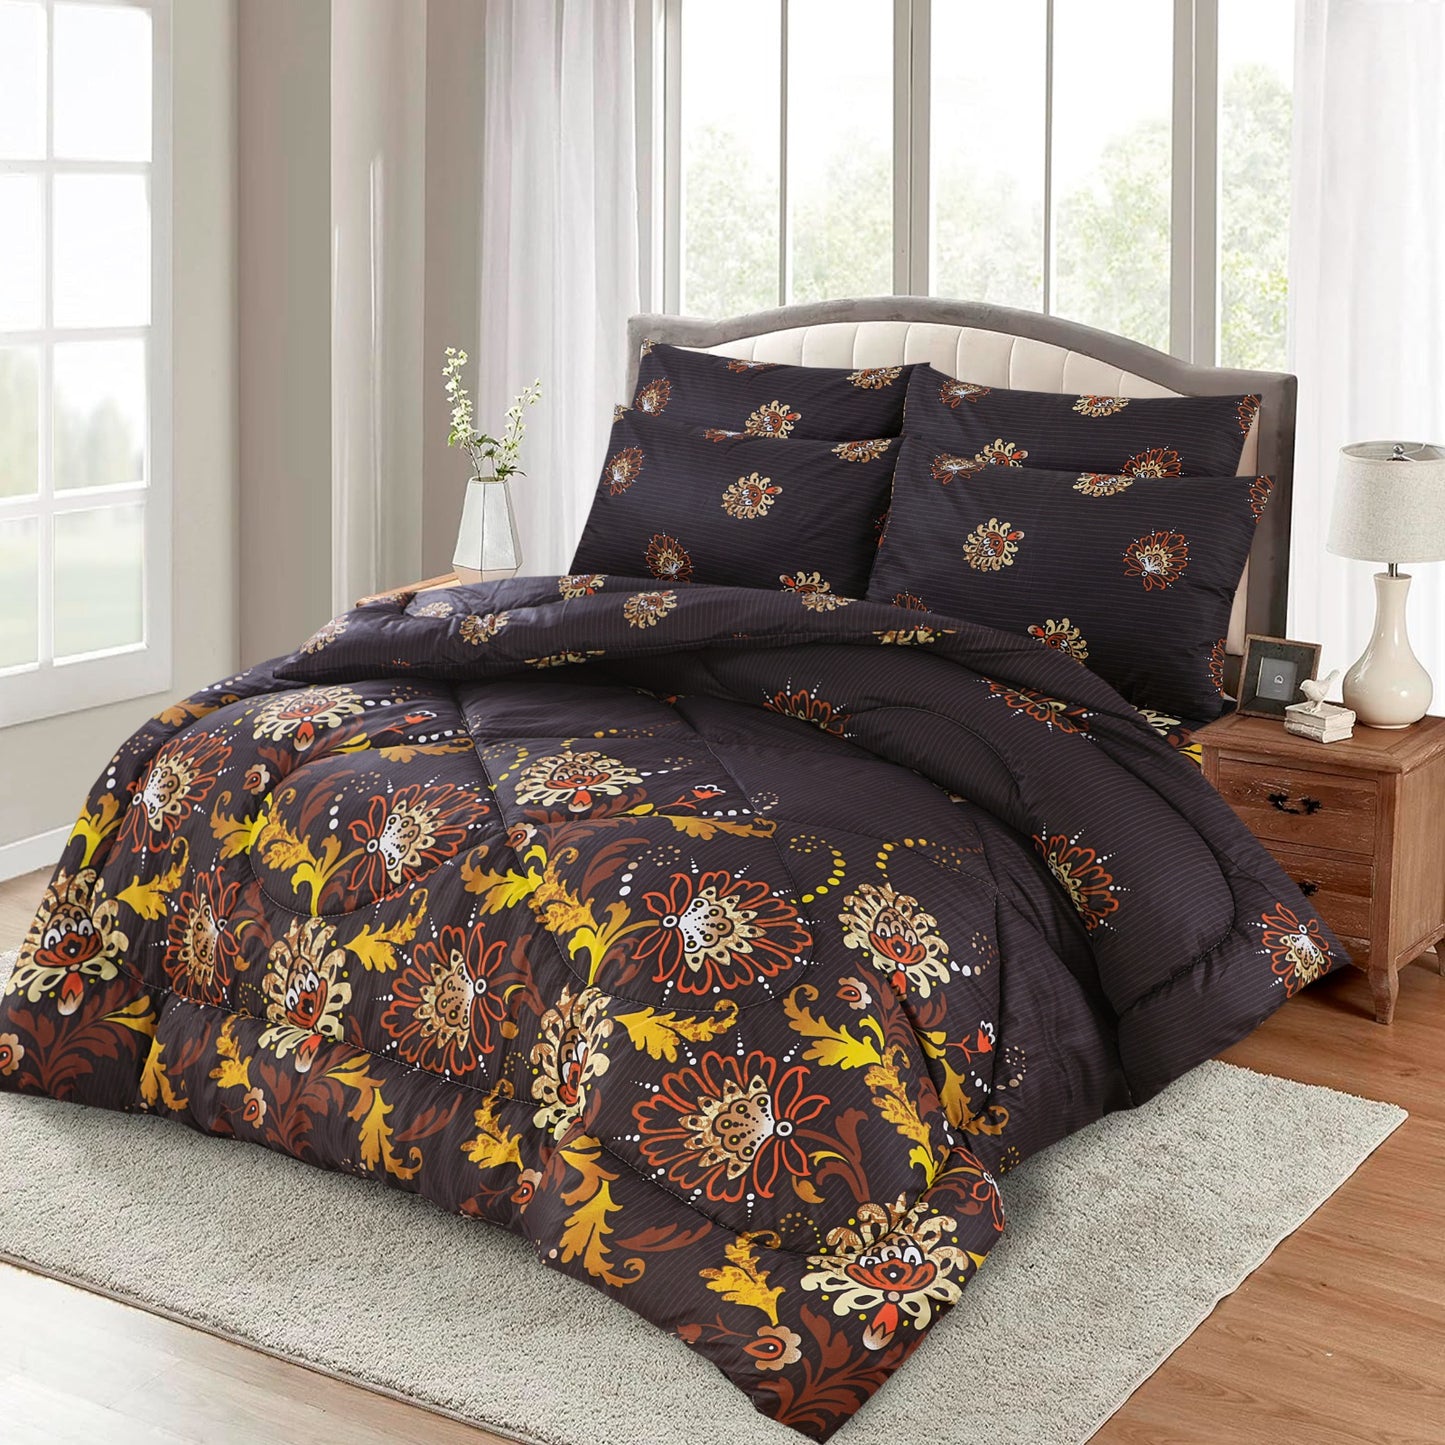 The Lily Blossom-Quilt Set